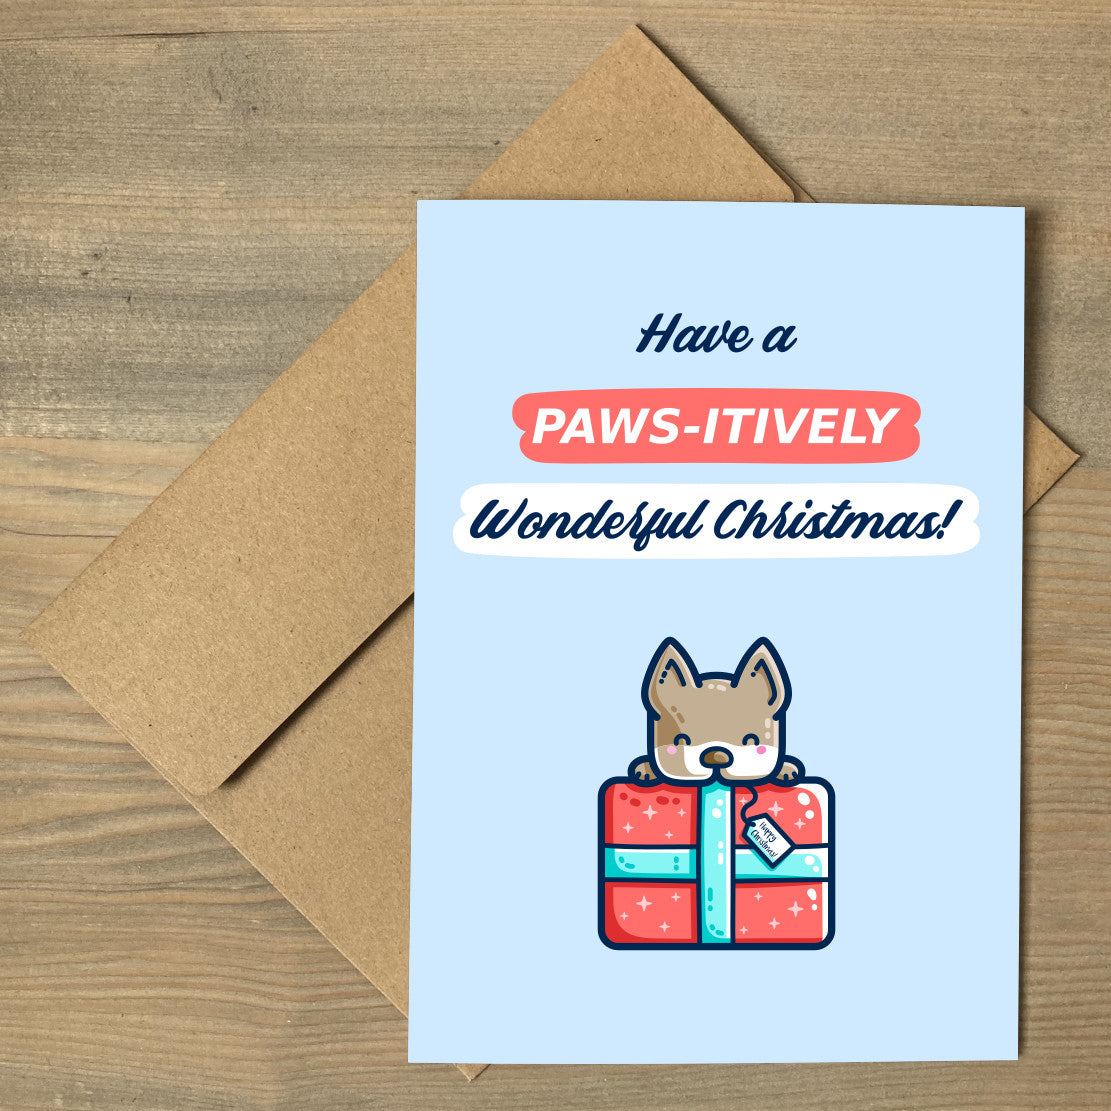 A pale blue card with the words 'have a paws-itively wonderful Christmas!' written above a picture of a dog peering over the top of a large wrapped red present. The card is lying flat on a brown envelope.